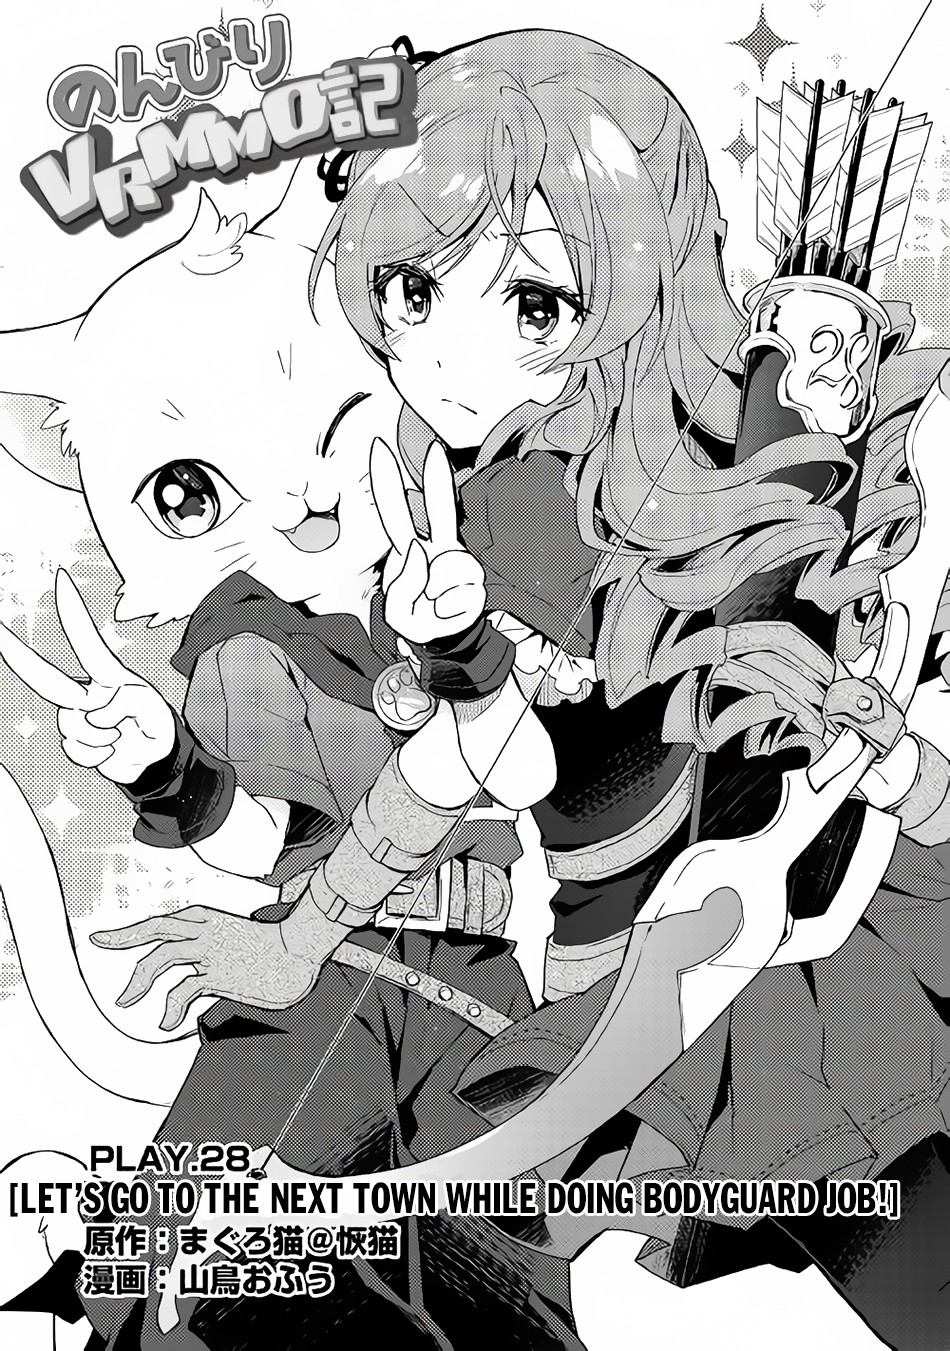 Nonbiri Vrmmoki Chapter 28: Let's Go To The Next Town While Doing Bodyguard Job! - Picture 2